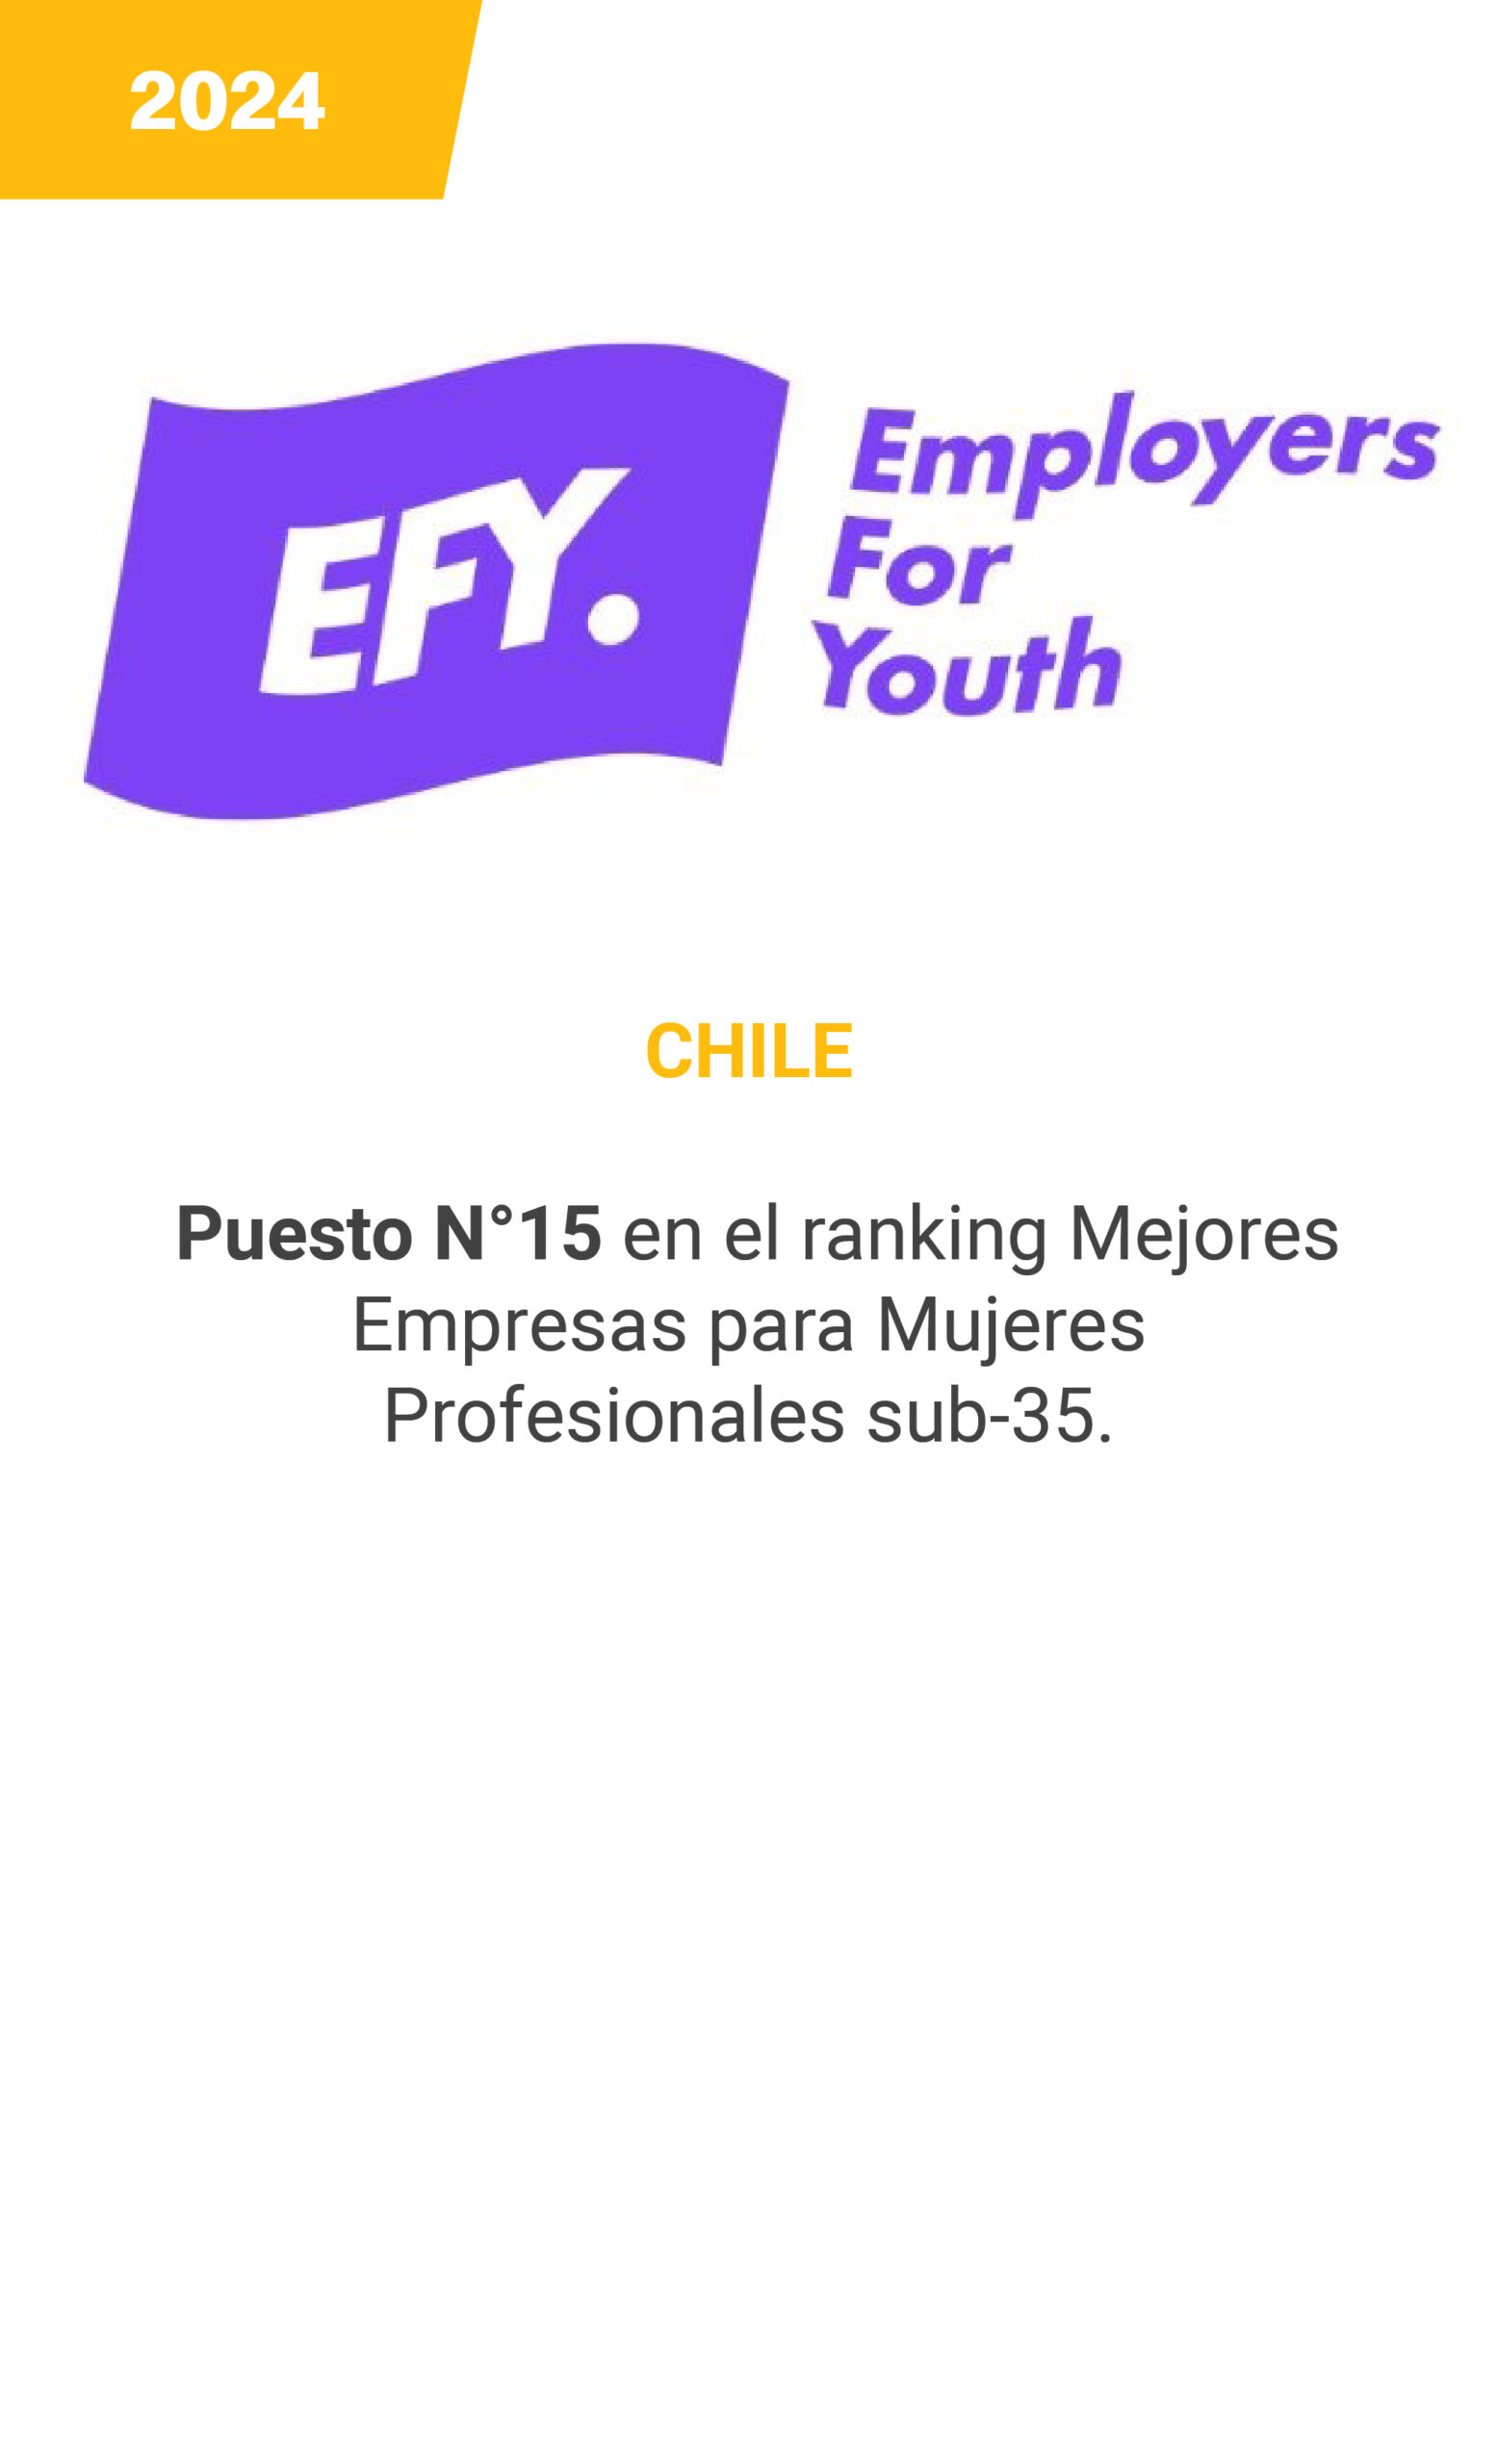 Employers for Youth - Chile 2024 - mobile